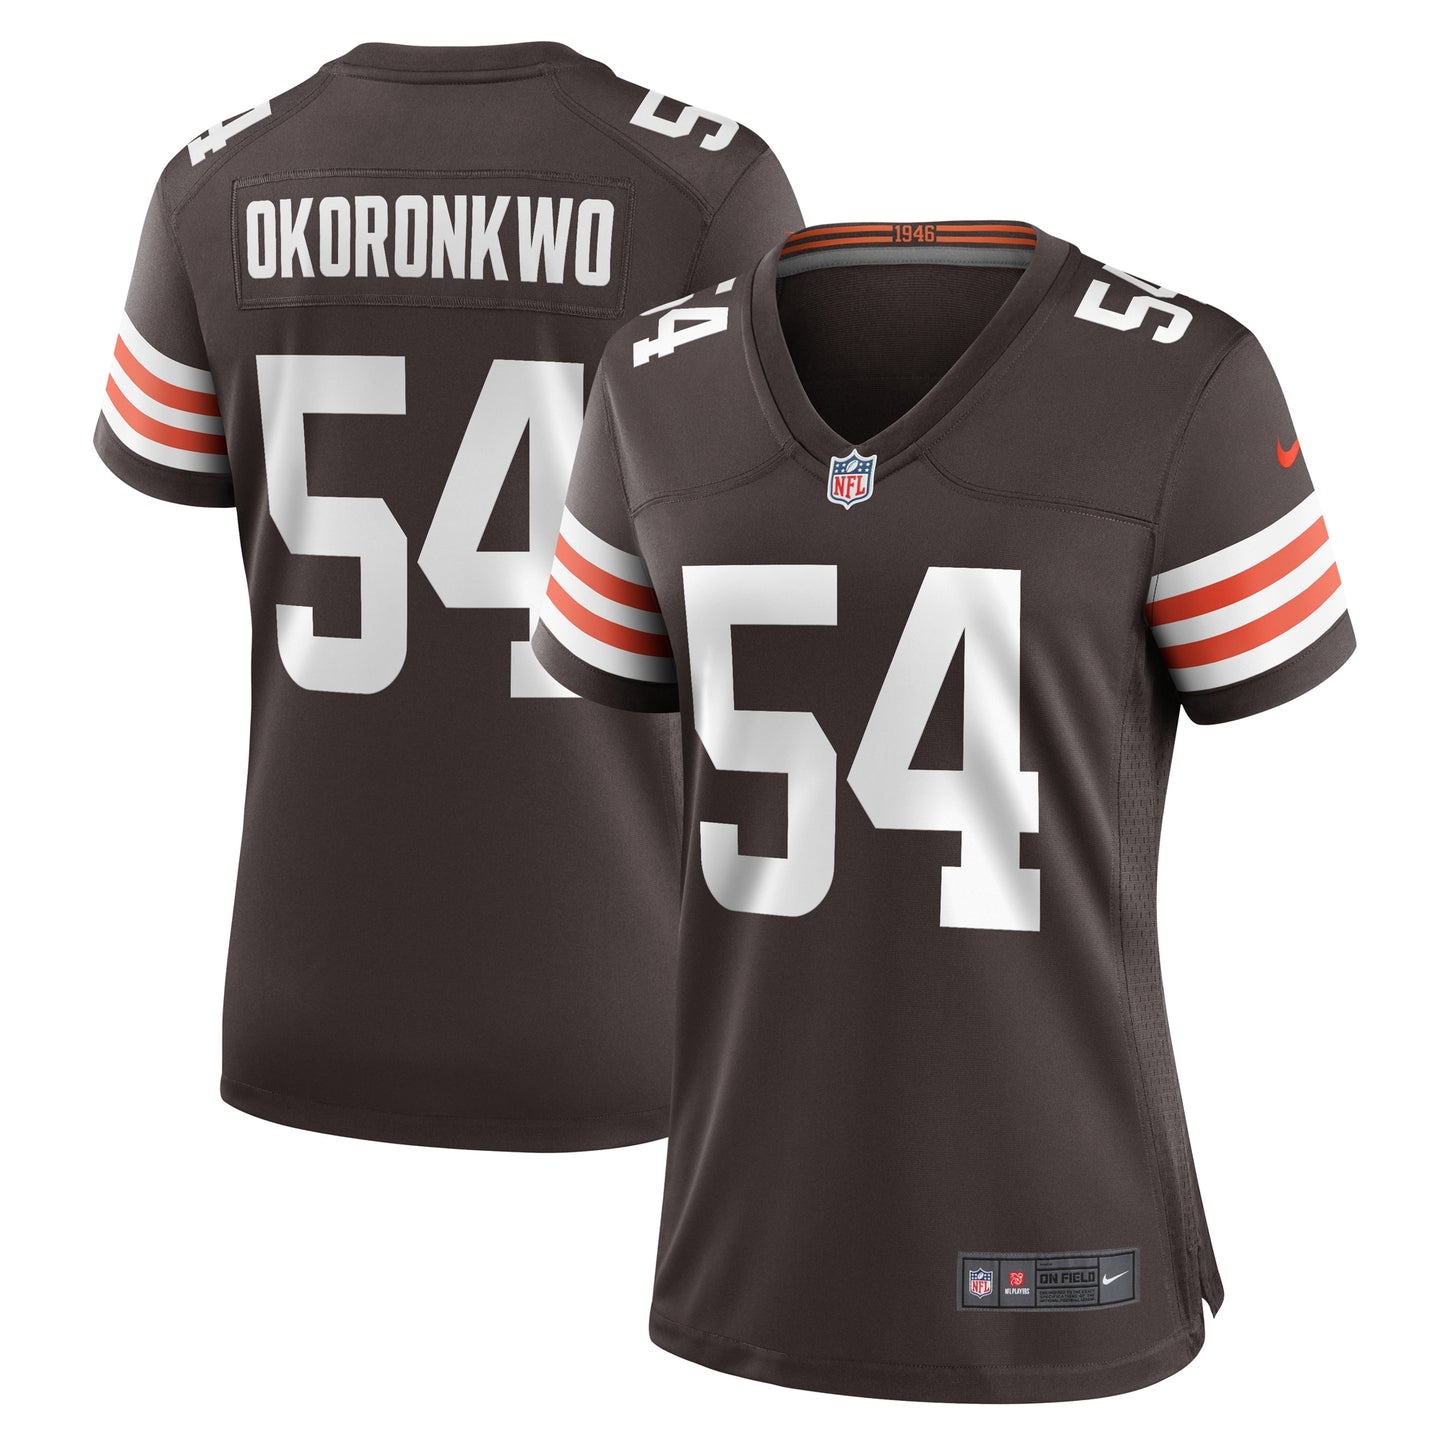 Ogbonnia Okoronkwo Cleveland Browns Nike Women's Game Player Jersey - Brown